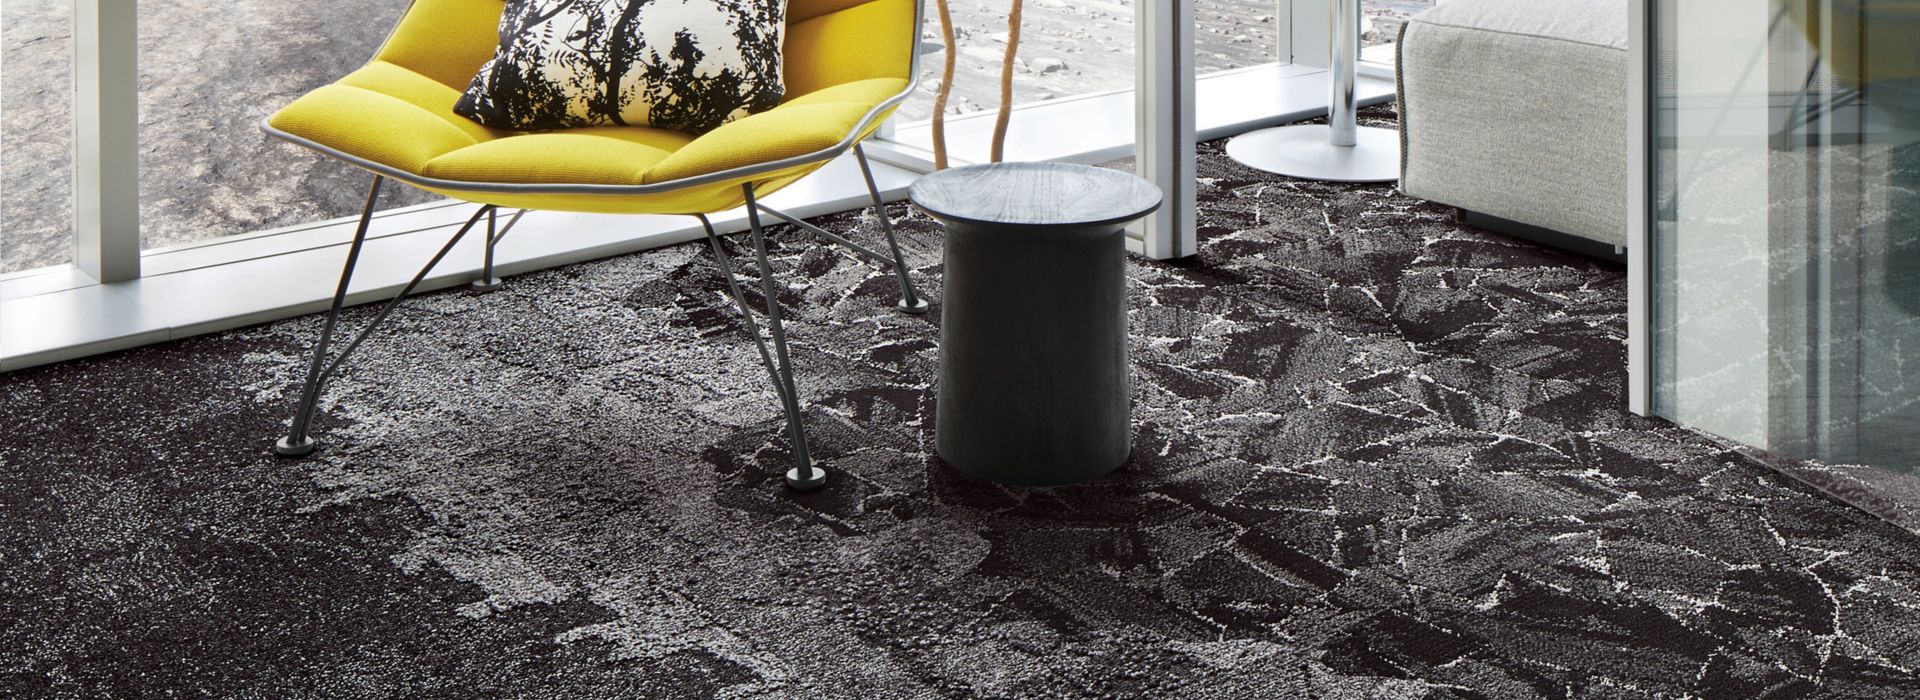 Interface Bridge Creek, Flat Rock, Mountain Rock and Mile Rock carpet tiles in seating area with yellow chair numéro d’image 2